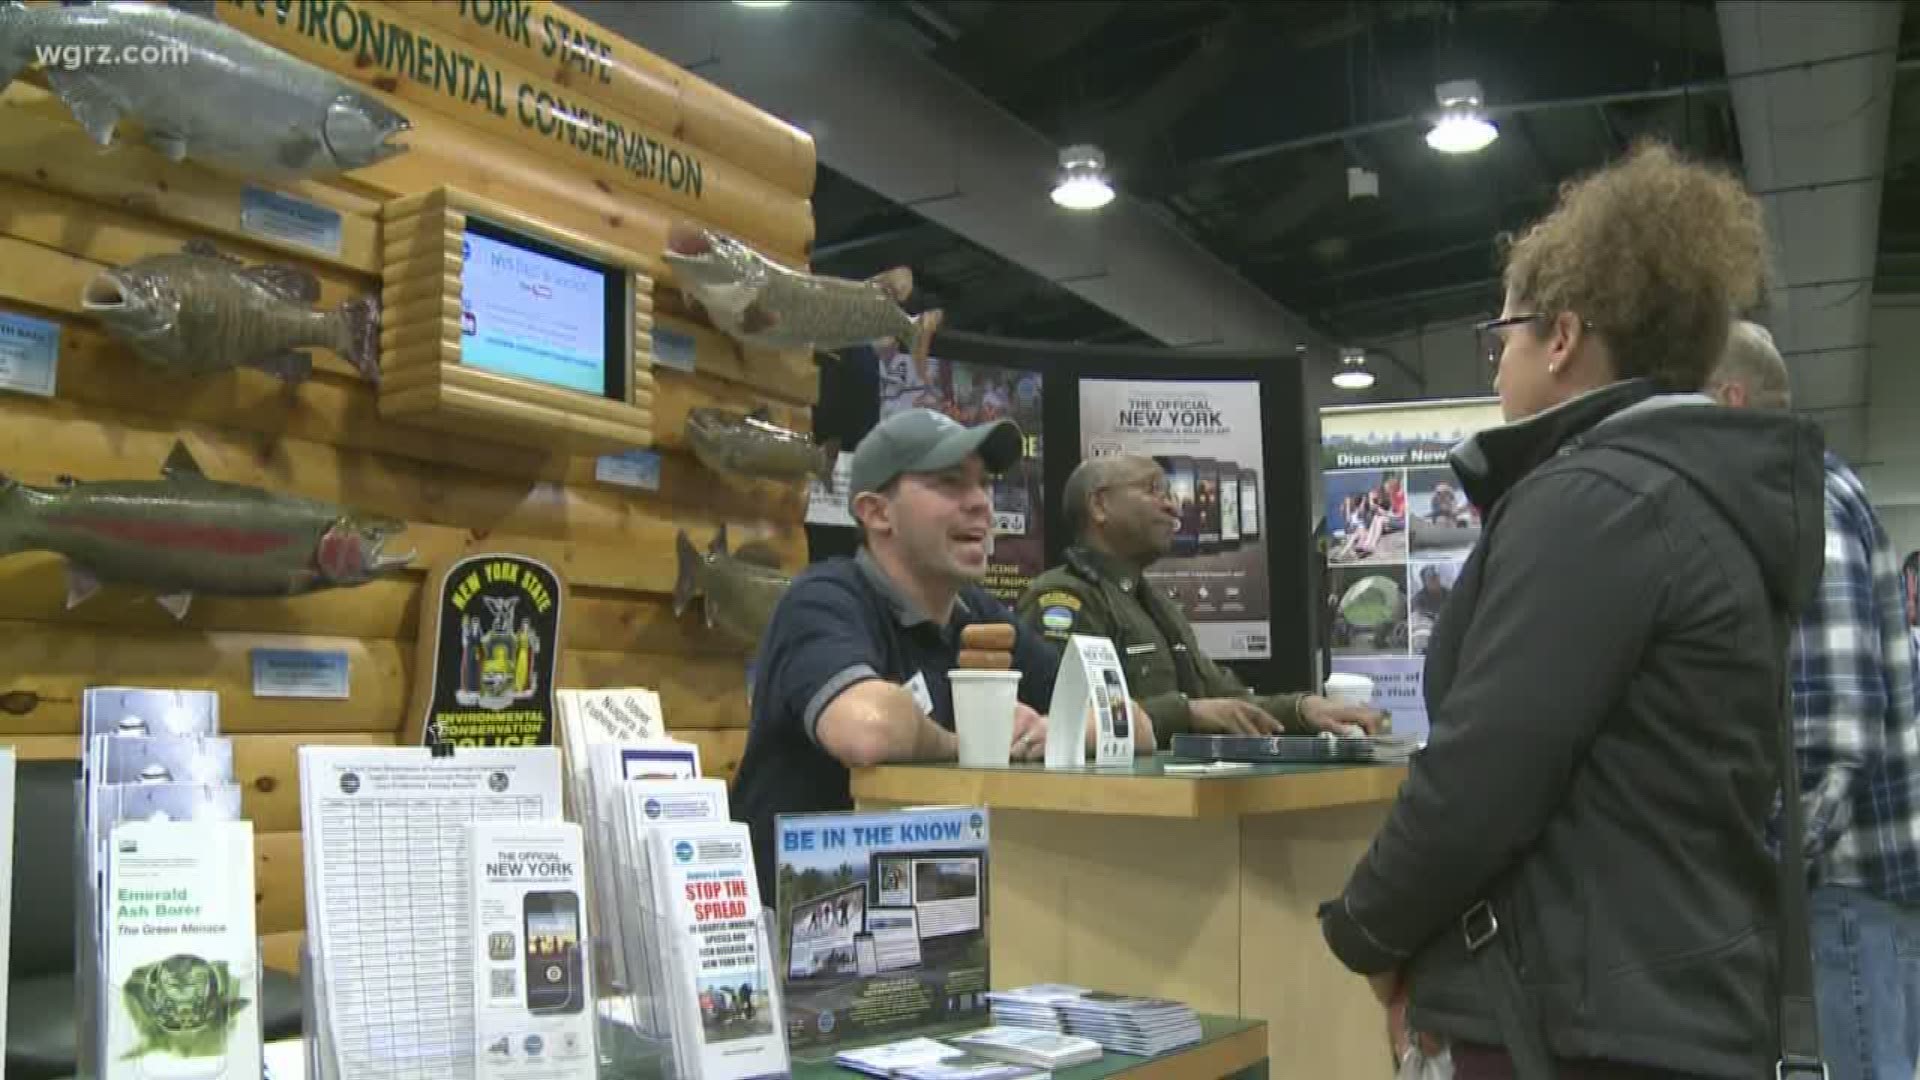 There are 175 exhibitors and more than 200 seminars this weekend. The show runs through Sunday at the Conference and Event Center in Niagara Falls.